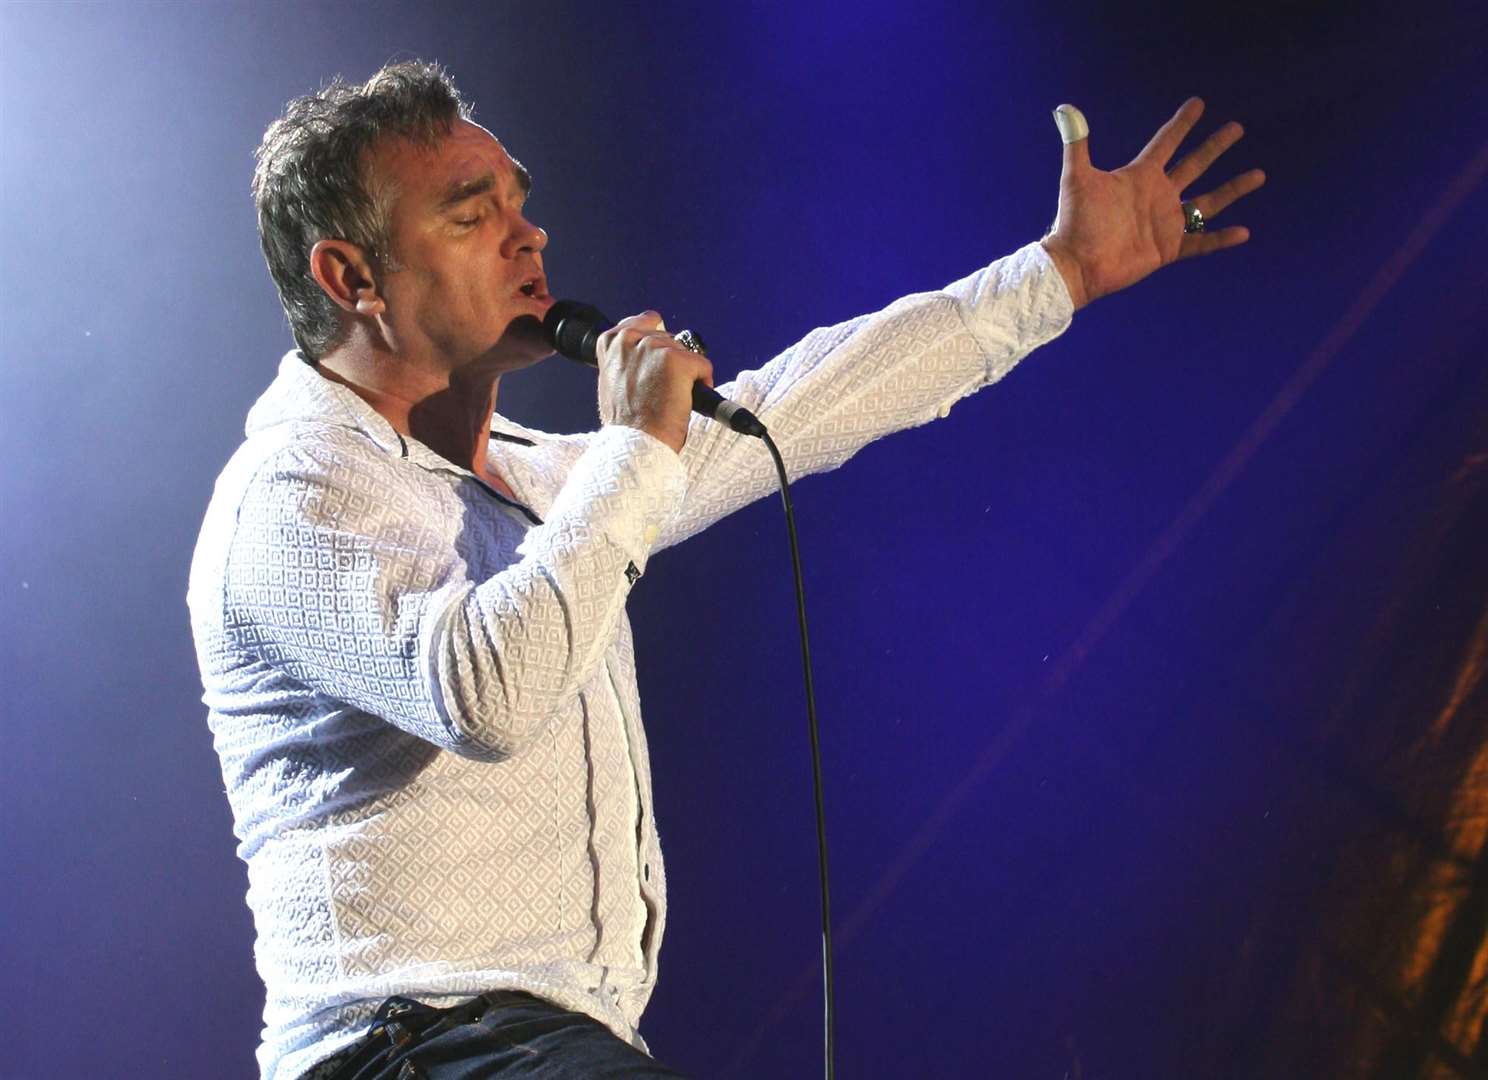 The (real) Morrissey during his headline slot at the 2011 Hop Farm Festival in Paddock Wood. Picture: Linda Cox